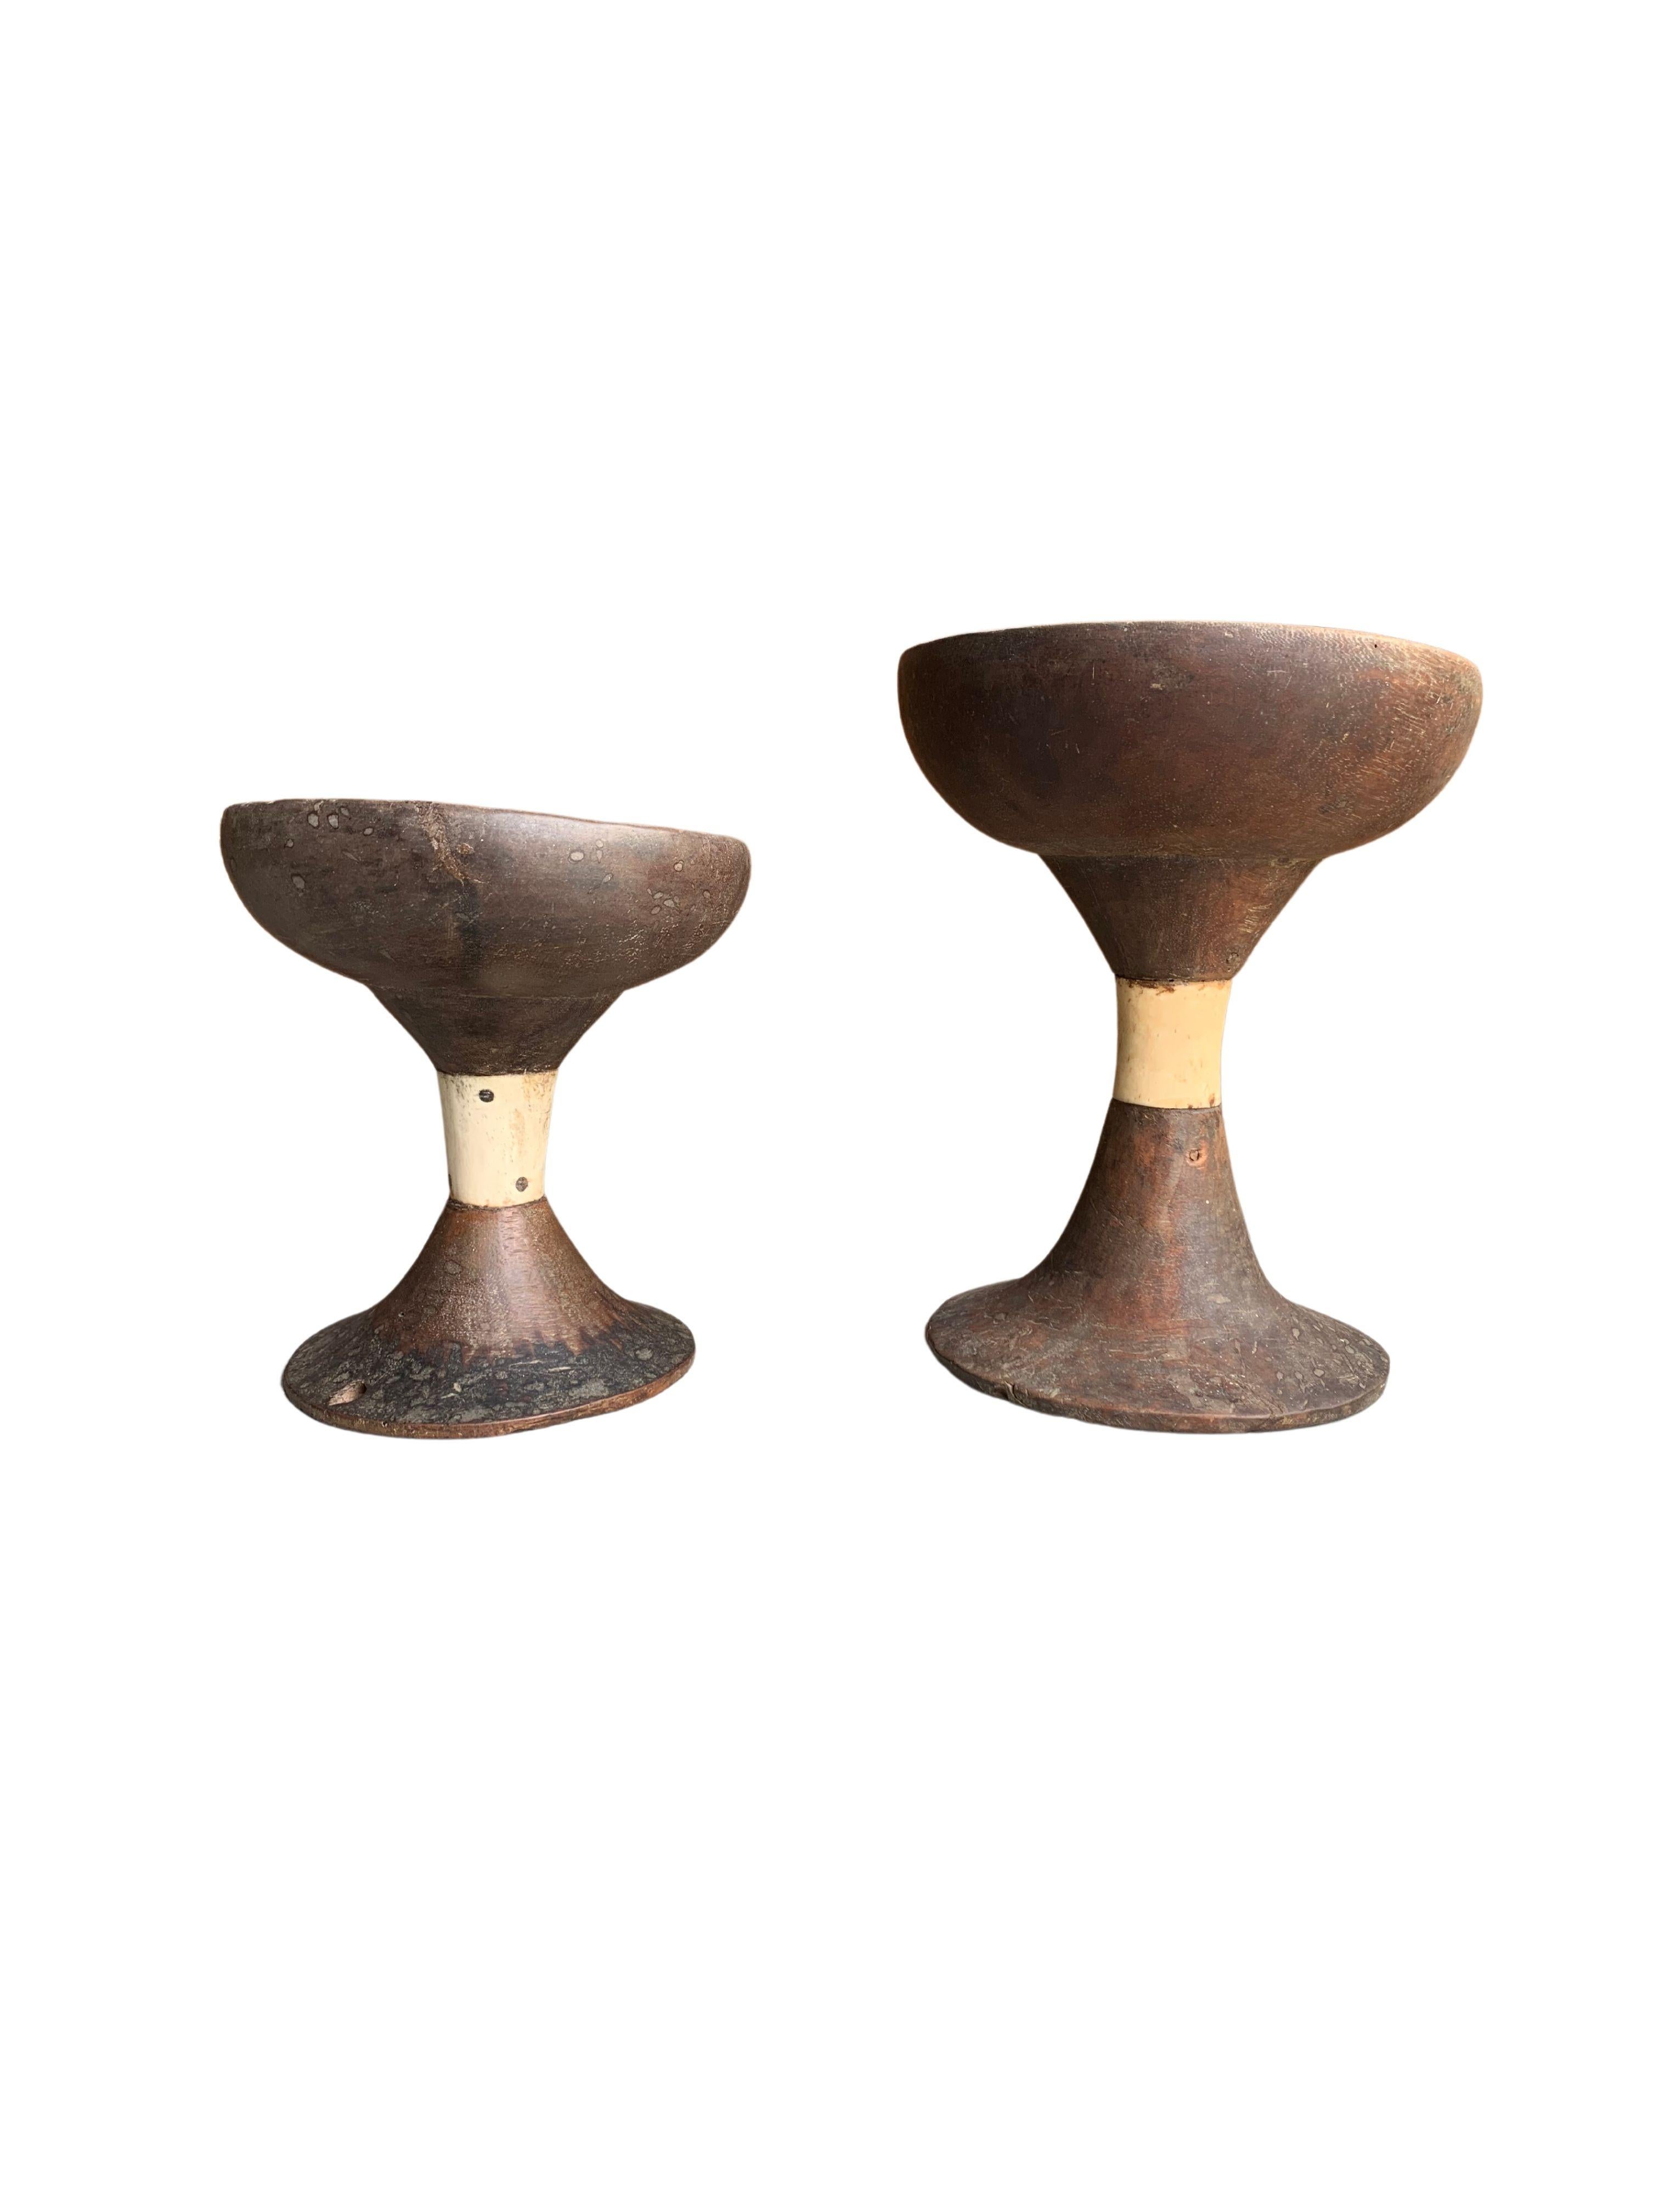 Indonesian Pair of Toraja Wood Ceremonial Bowls, Sulawesi, Indonesia, c. 1900 For Sale